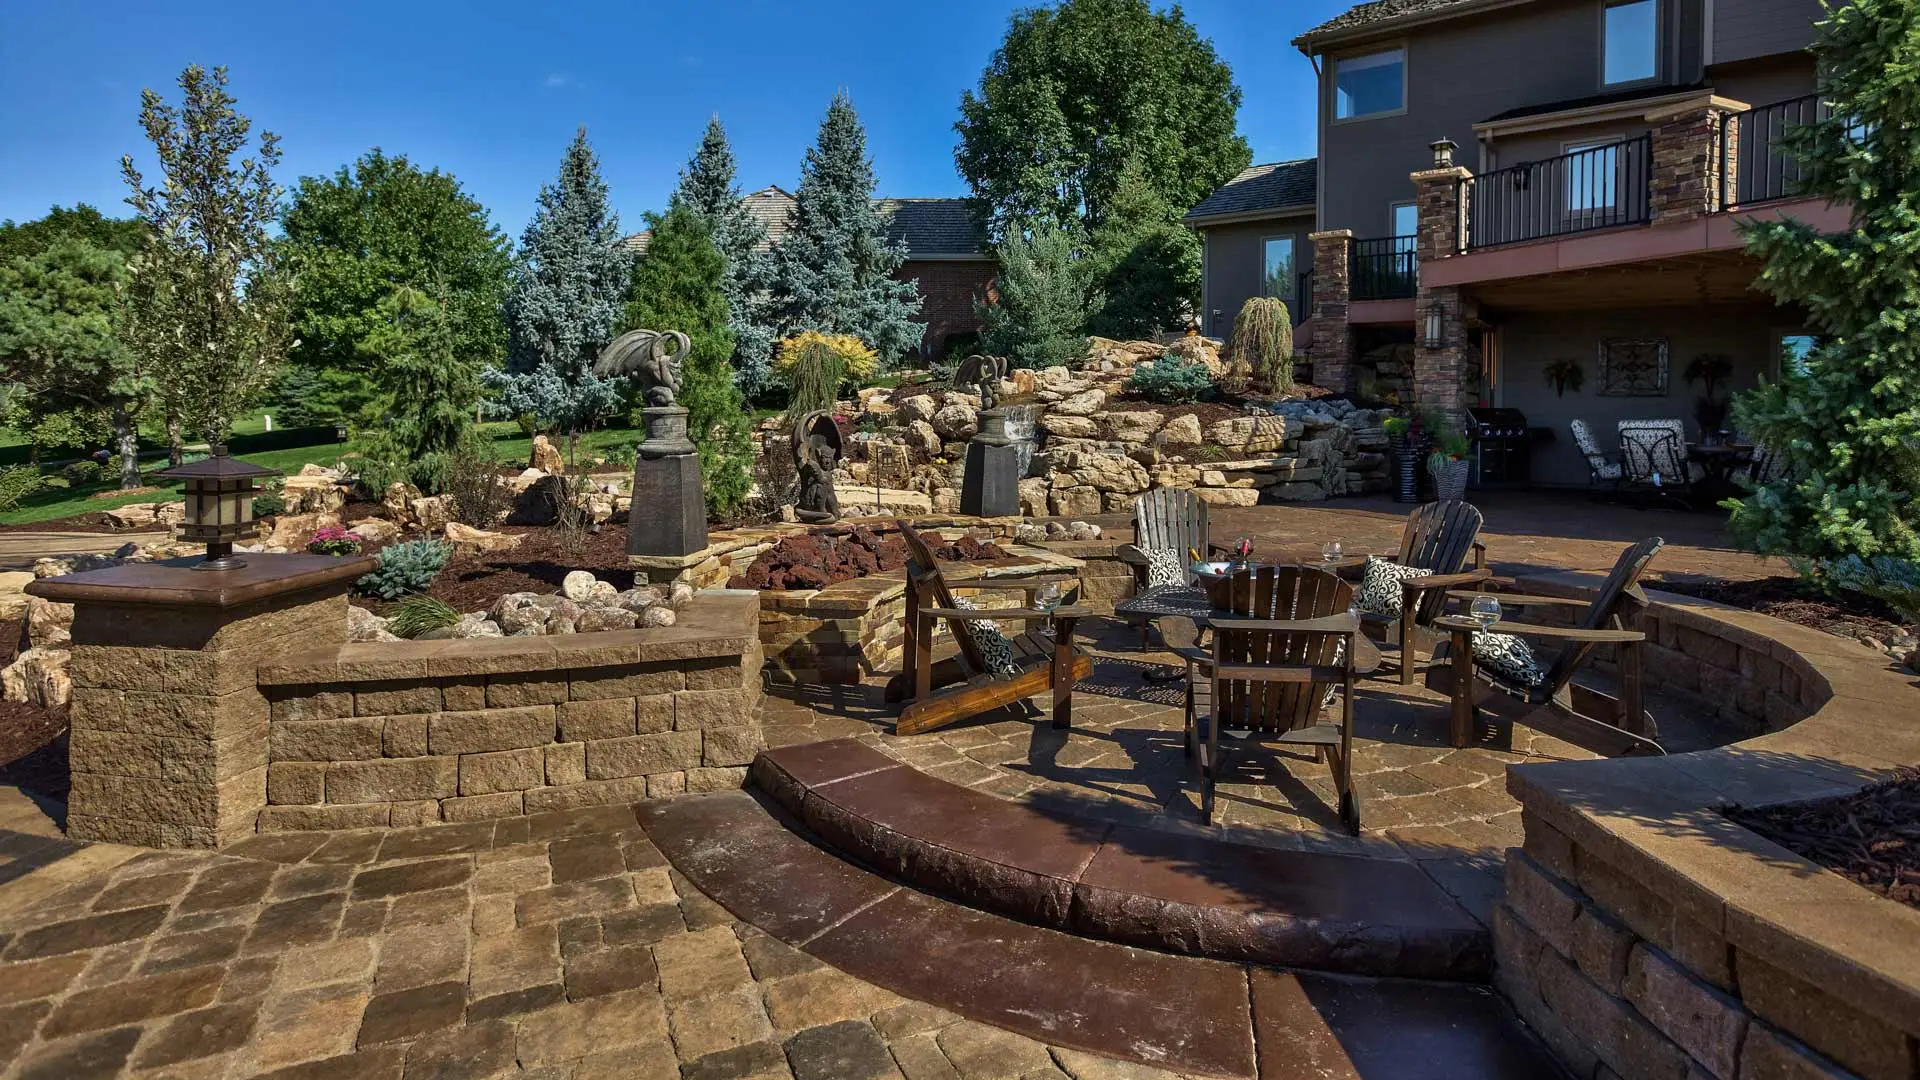 Luxury outdoor living space and paver patio installed near Elkhorn, Nebraska.